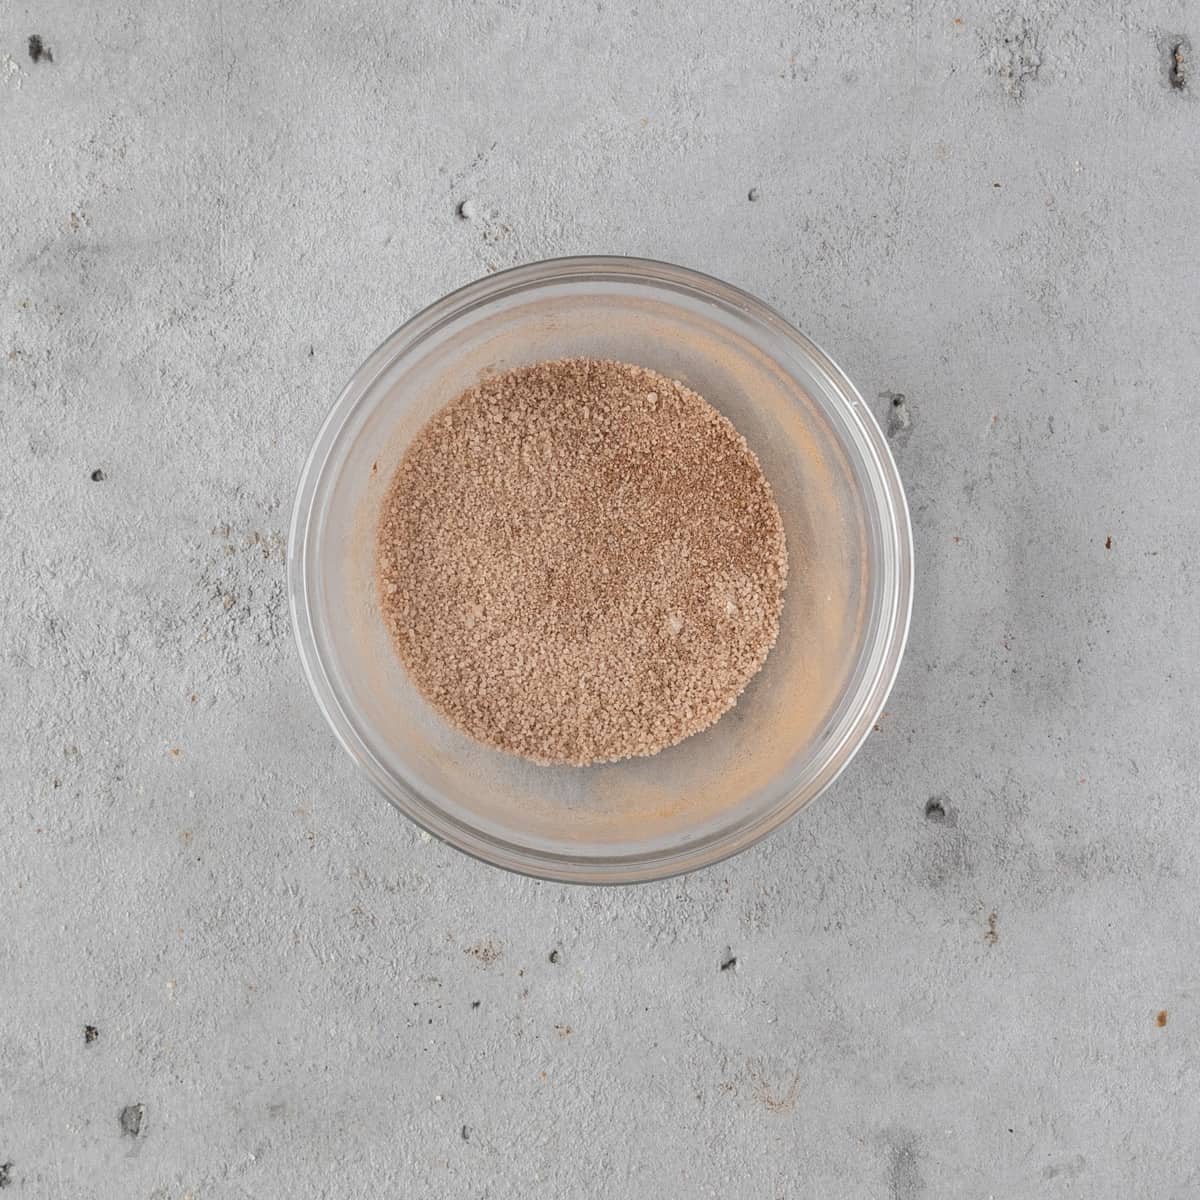 the cinnamon and sugar mixture in a glass bowl on a grey background.